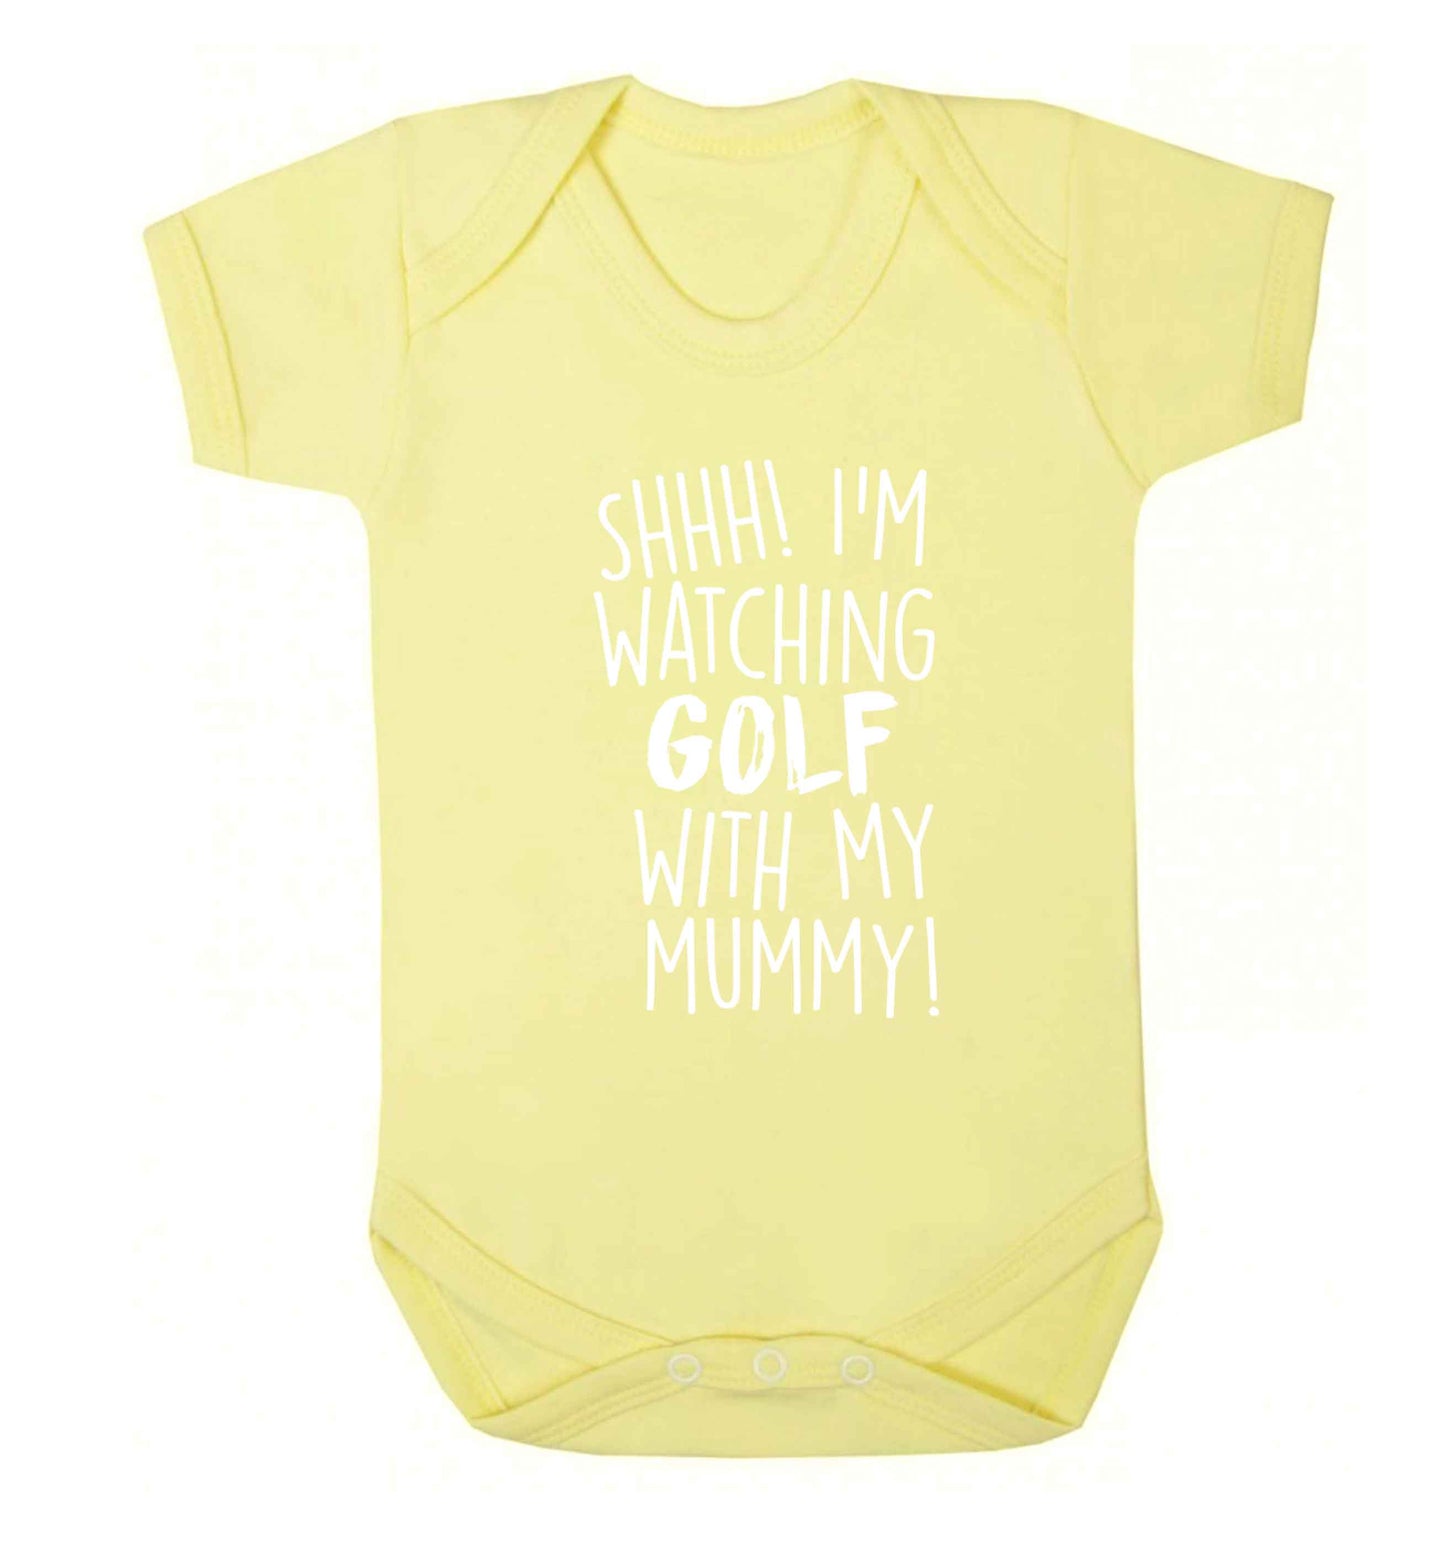 Shh I'm watching golf with my mummy Baby Vest pale yellow 18-24 months